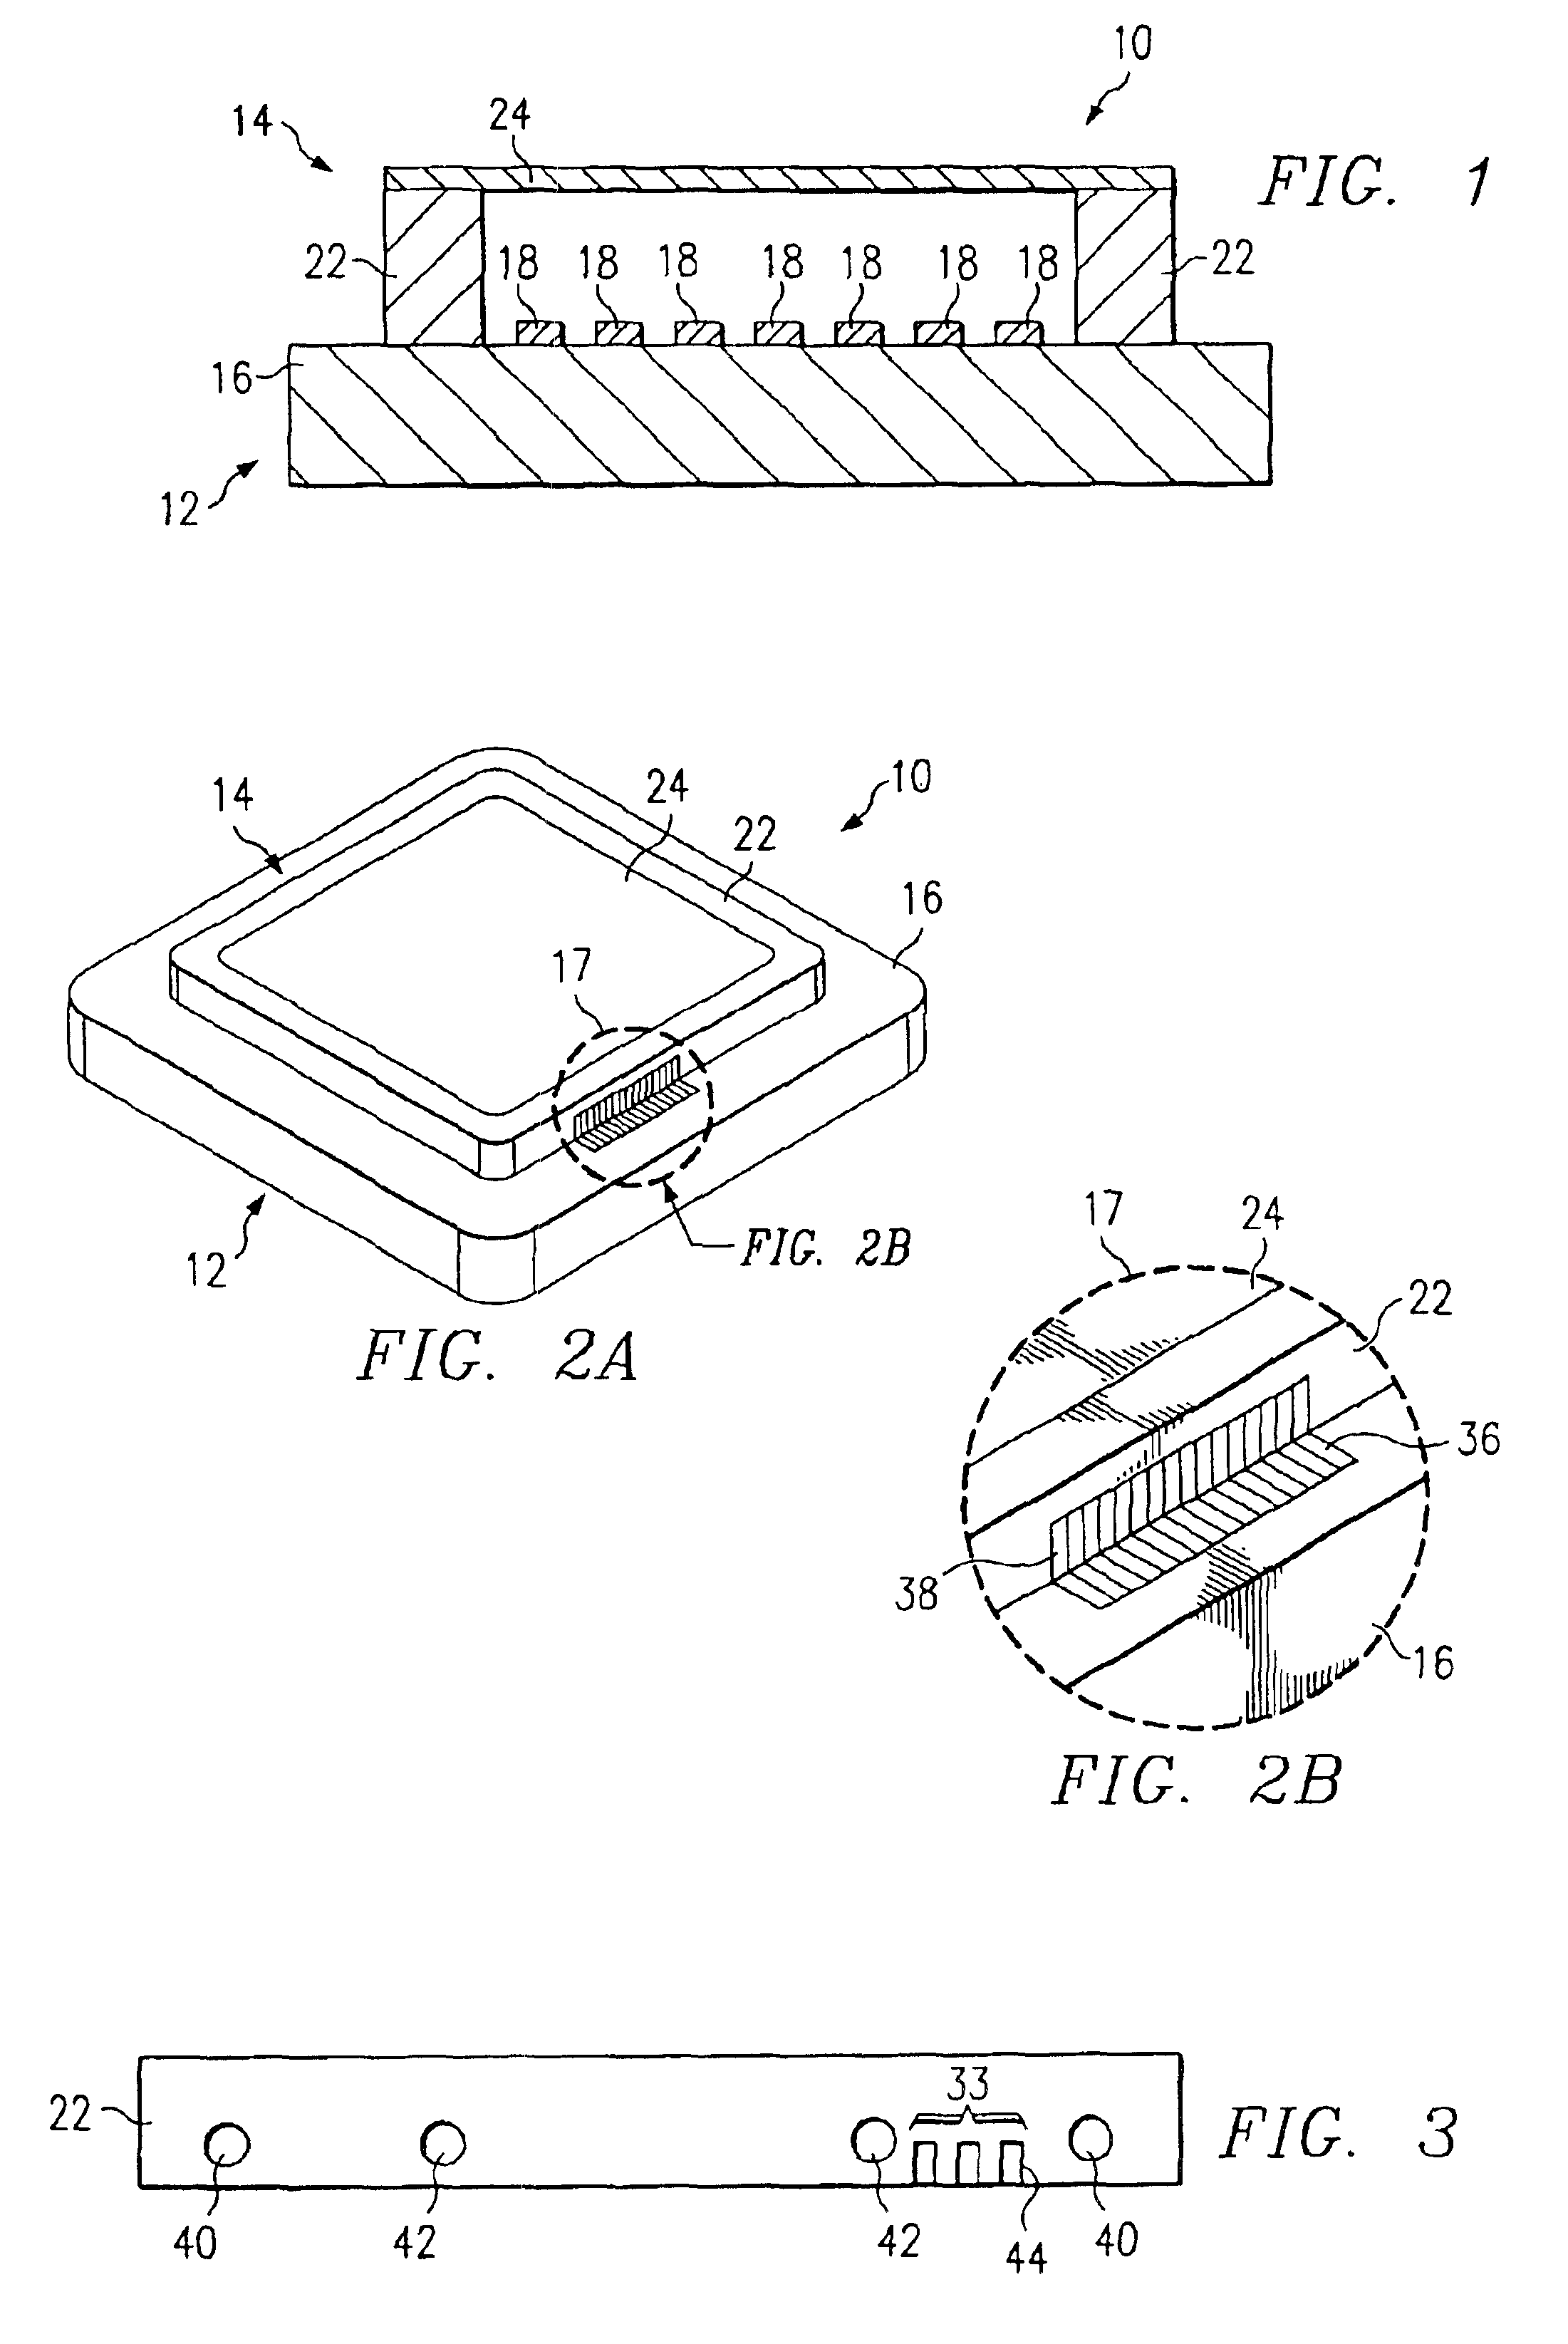 Method for constructing a photomask assembly using an encoded mark